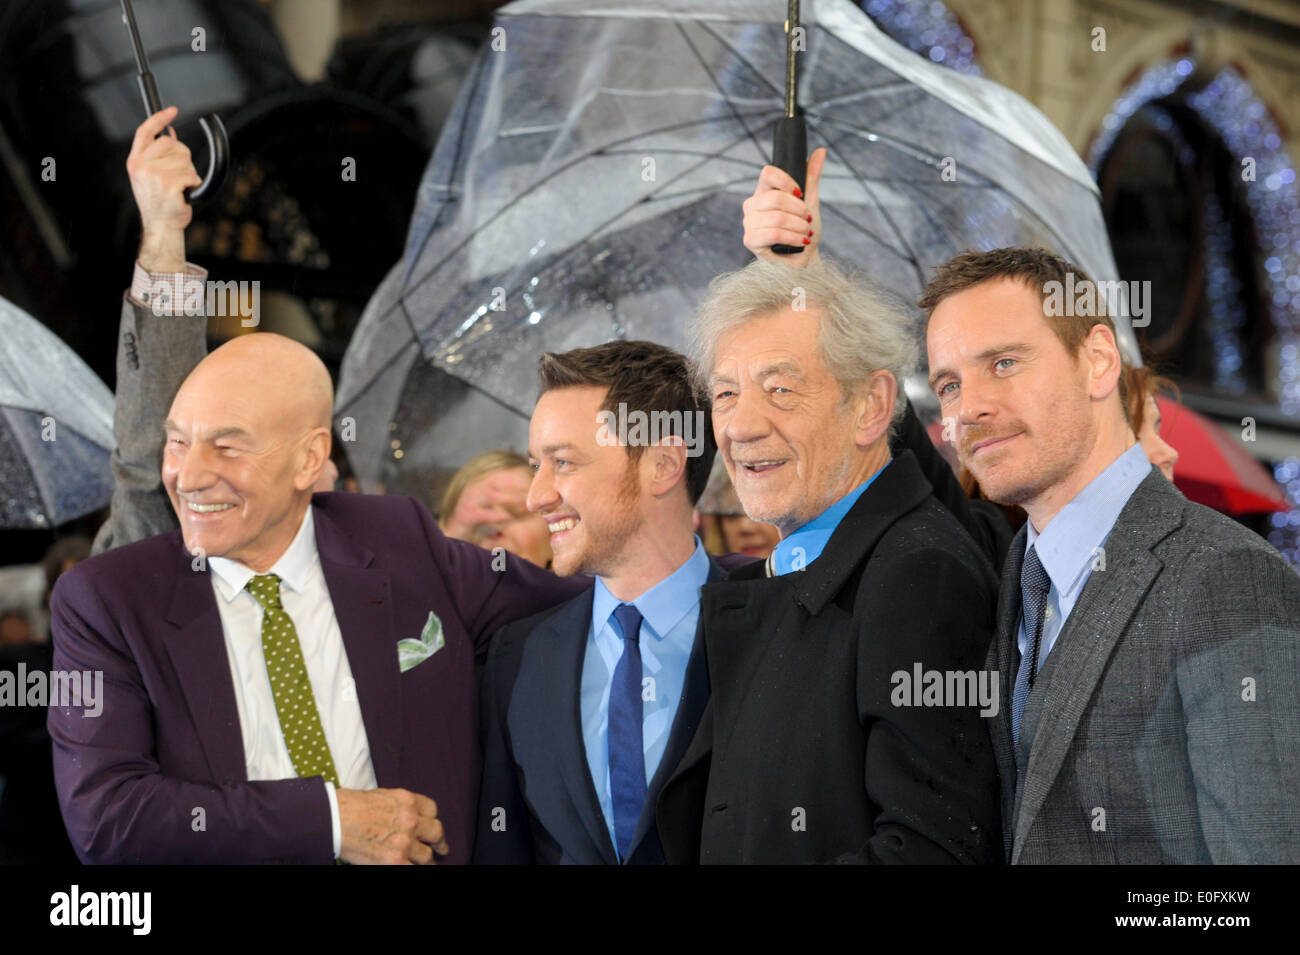 Cast Attends The X Men Days Of Future Past Uk Premiere On 12052014 At Odeon Leicester Square 